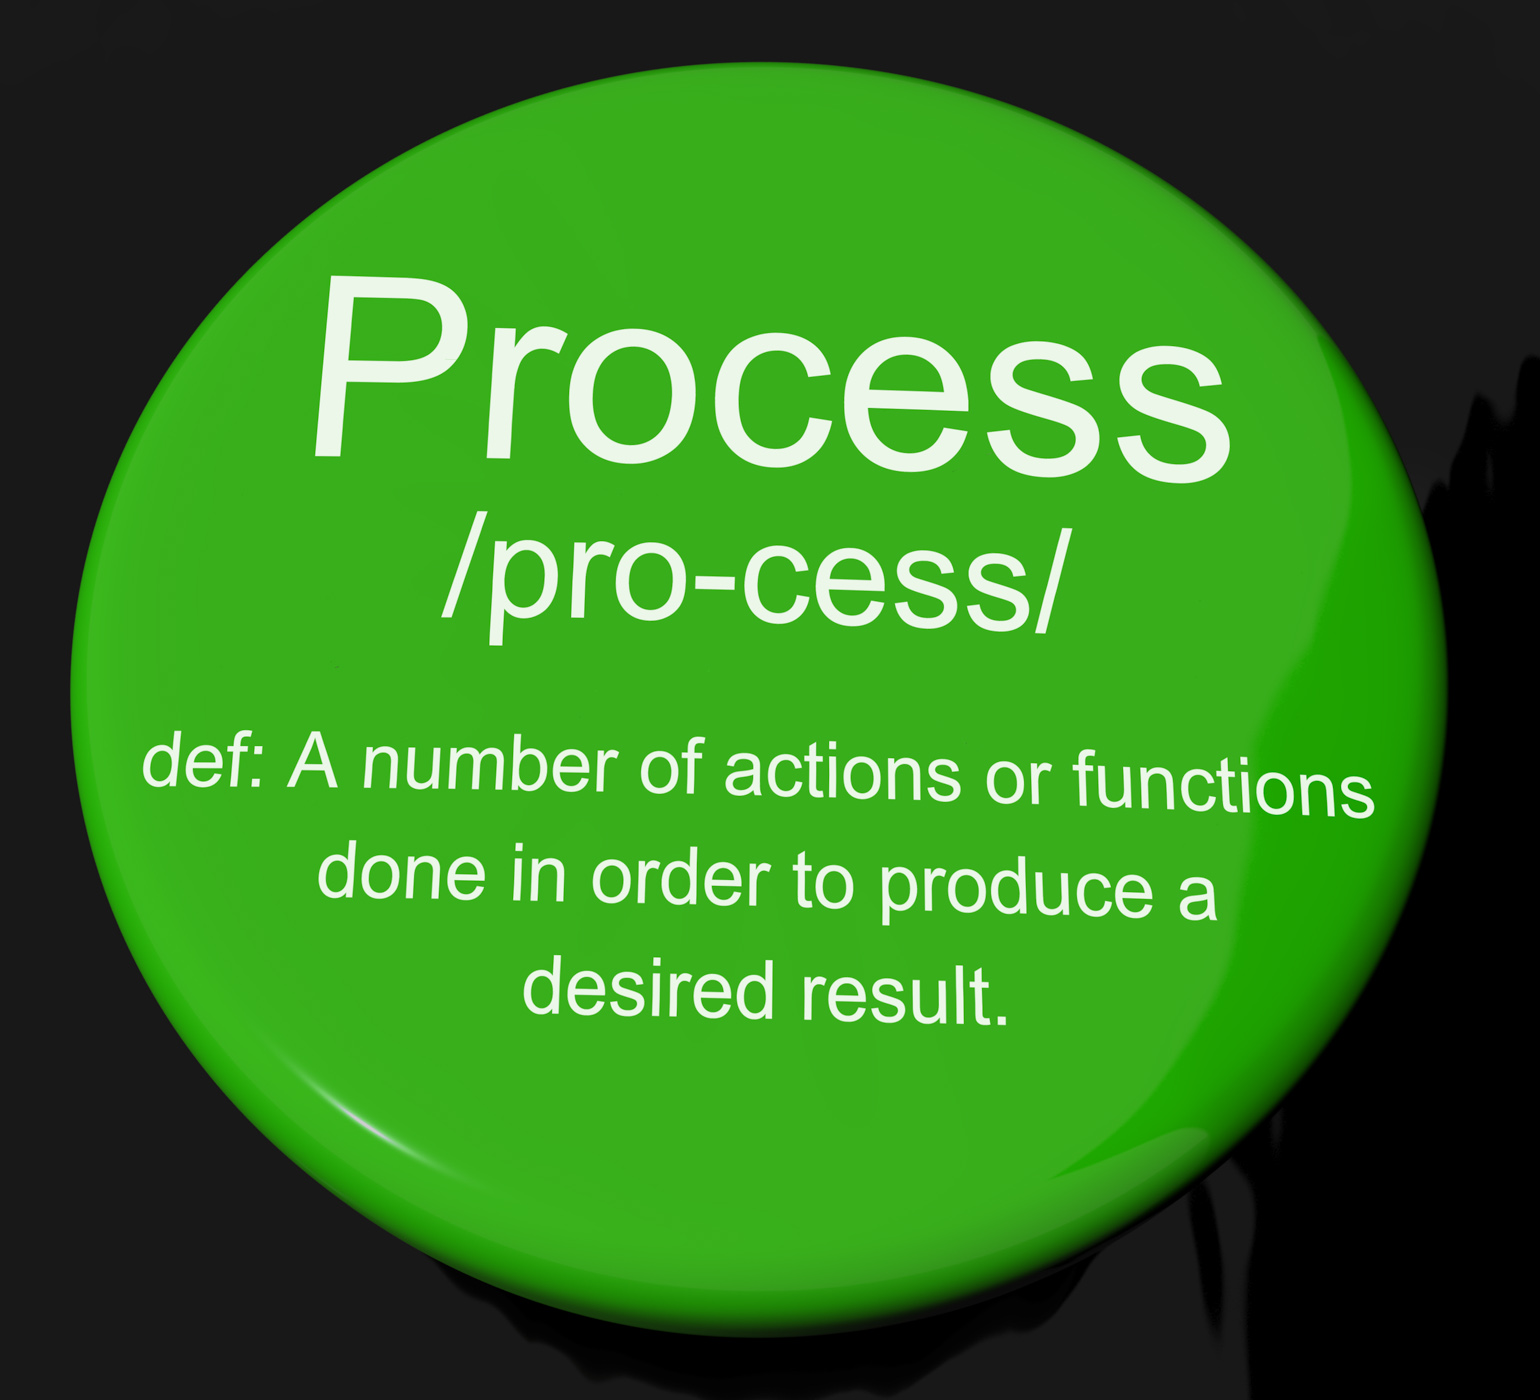 Process definition button showing result from actions or functions photo